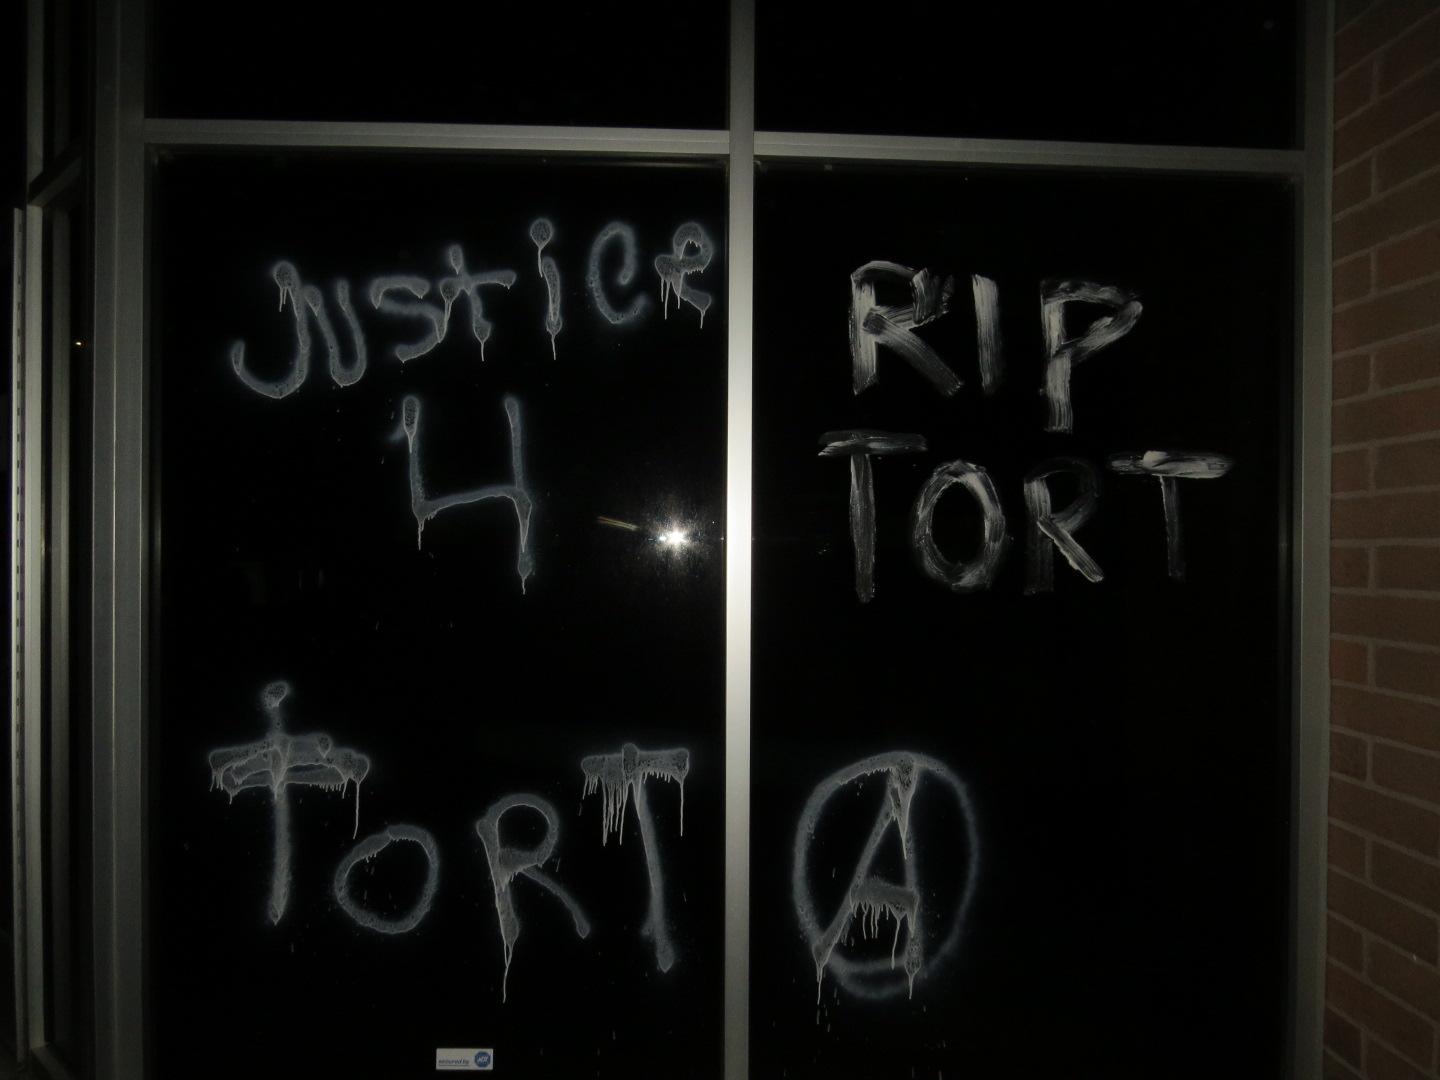 Office building windows, vandalized with acid-etching paint, read "Justice 4 Tort", "RIP TORT" and have a circle-a